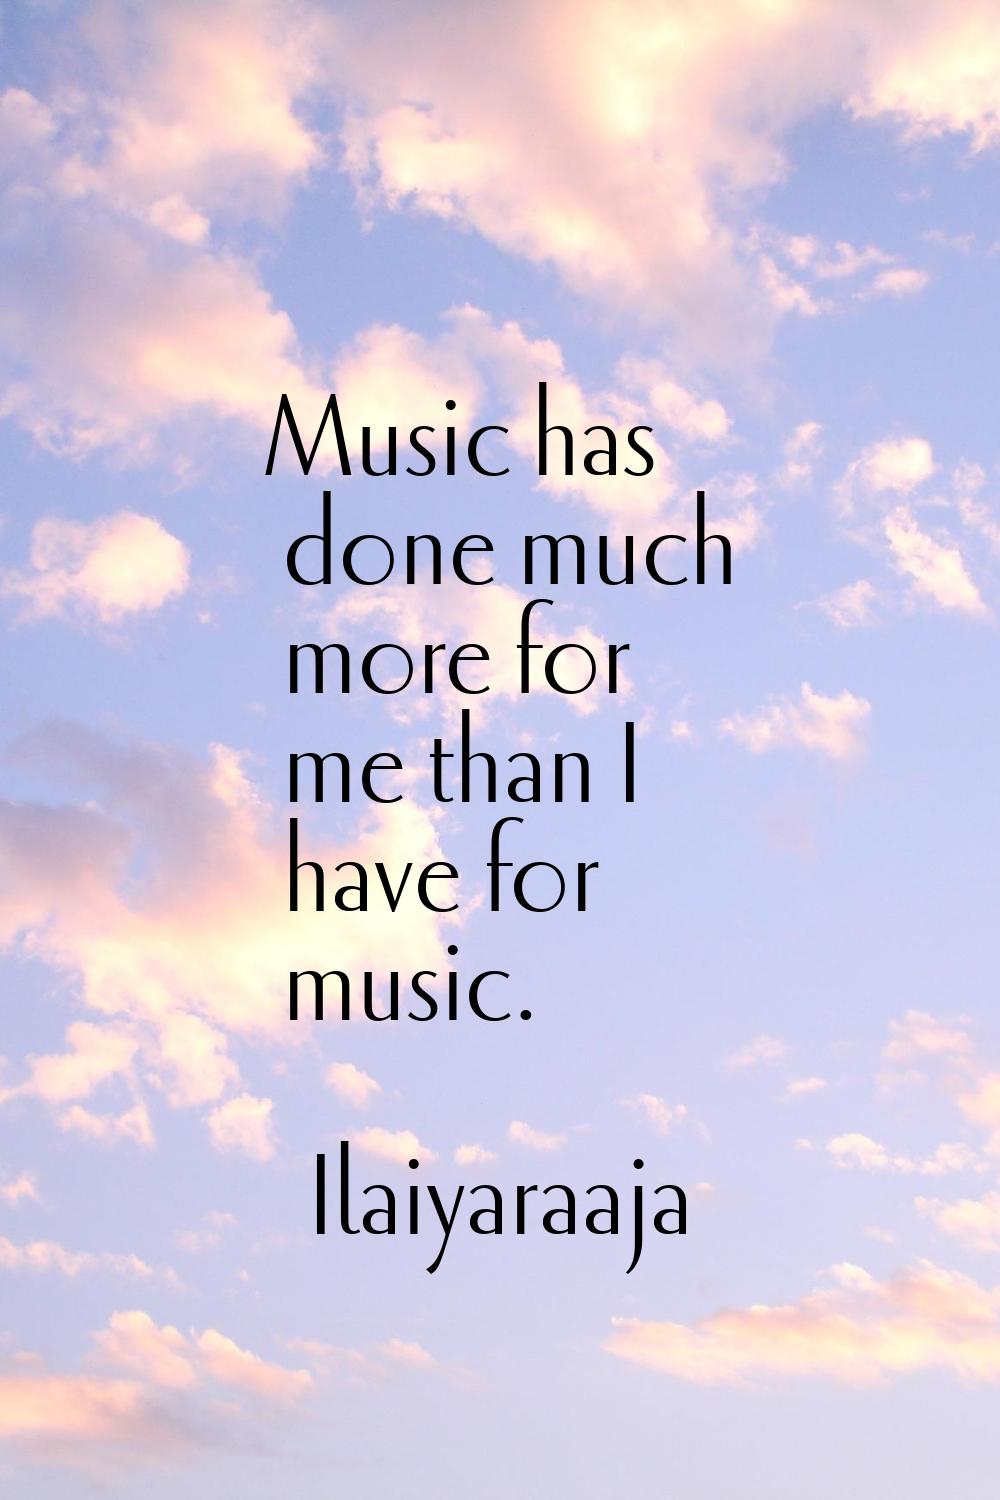 Music has done much more for me than I have for music.